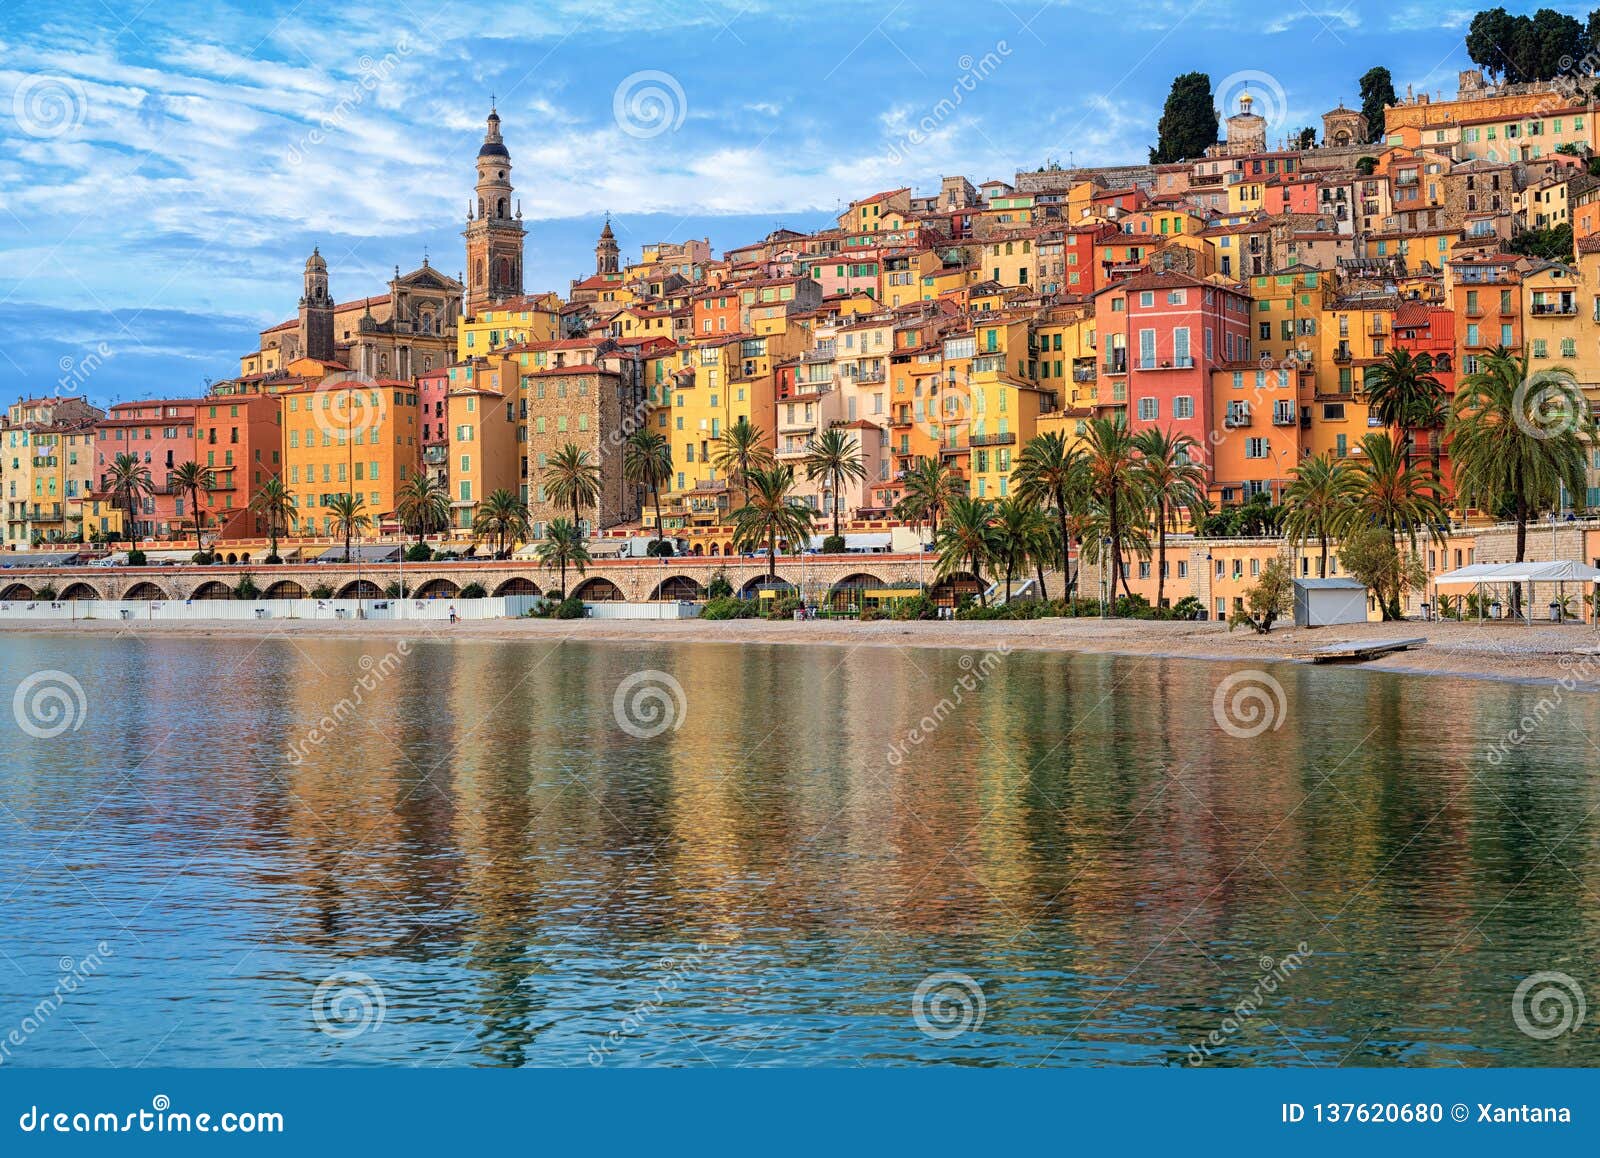 colorful houses in the old town menton, french riviera, france